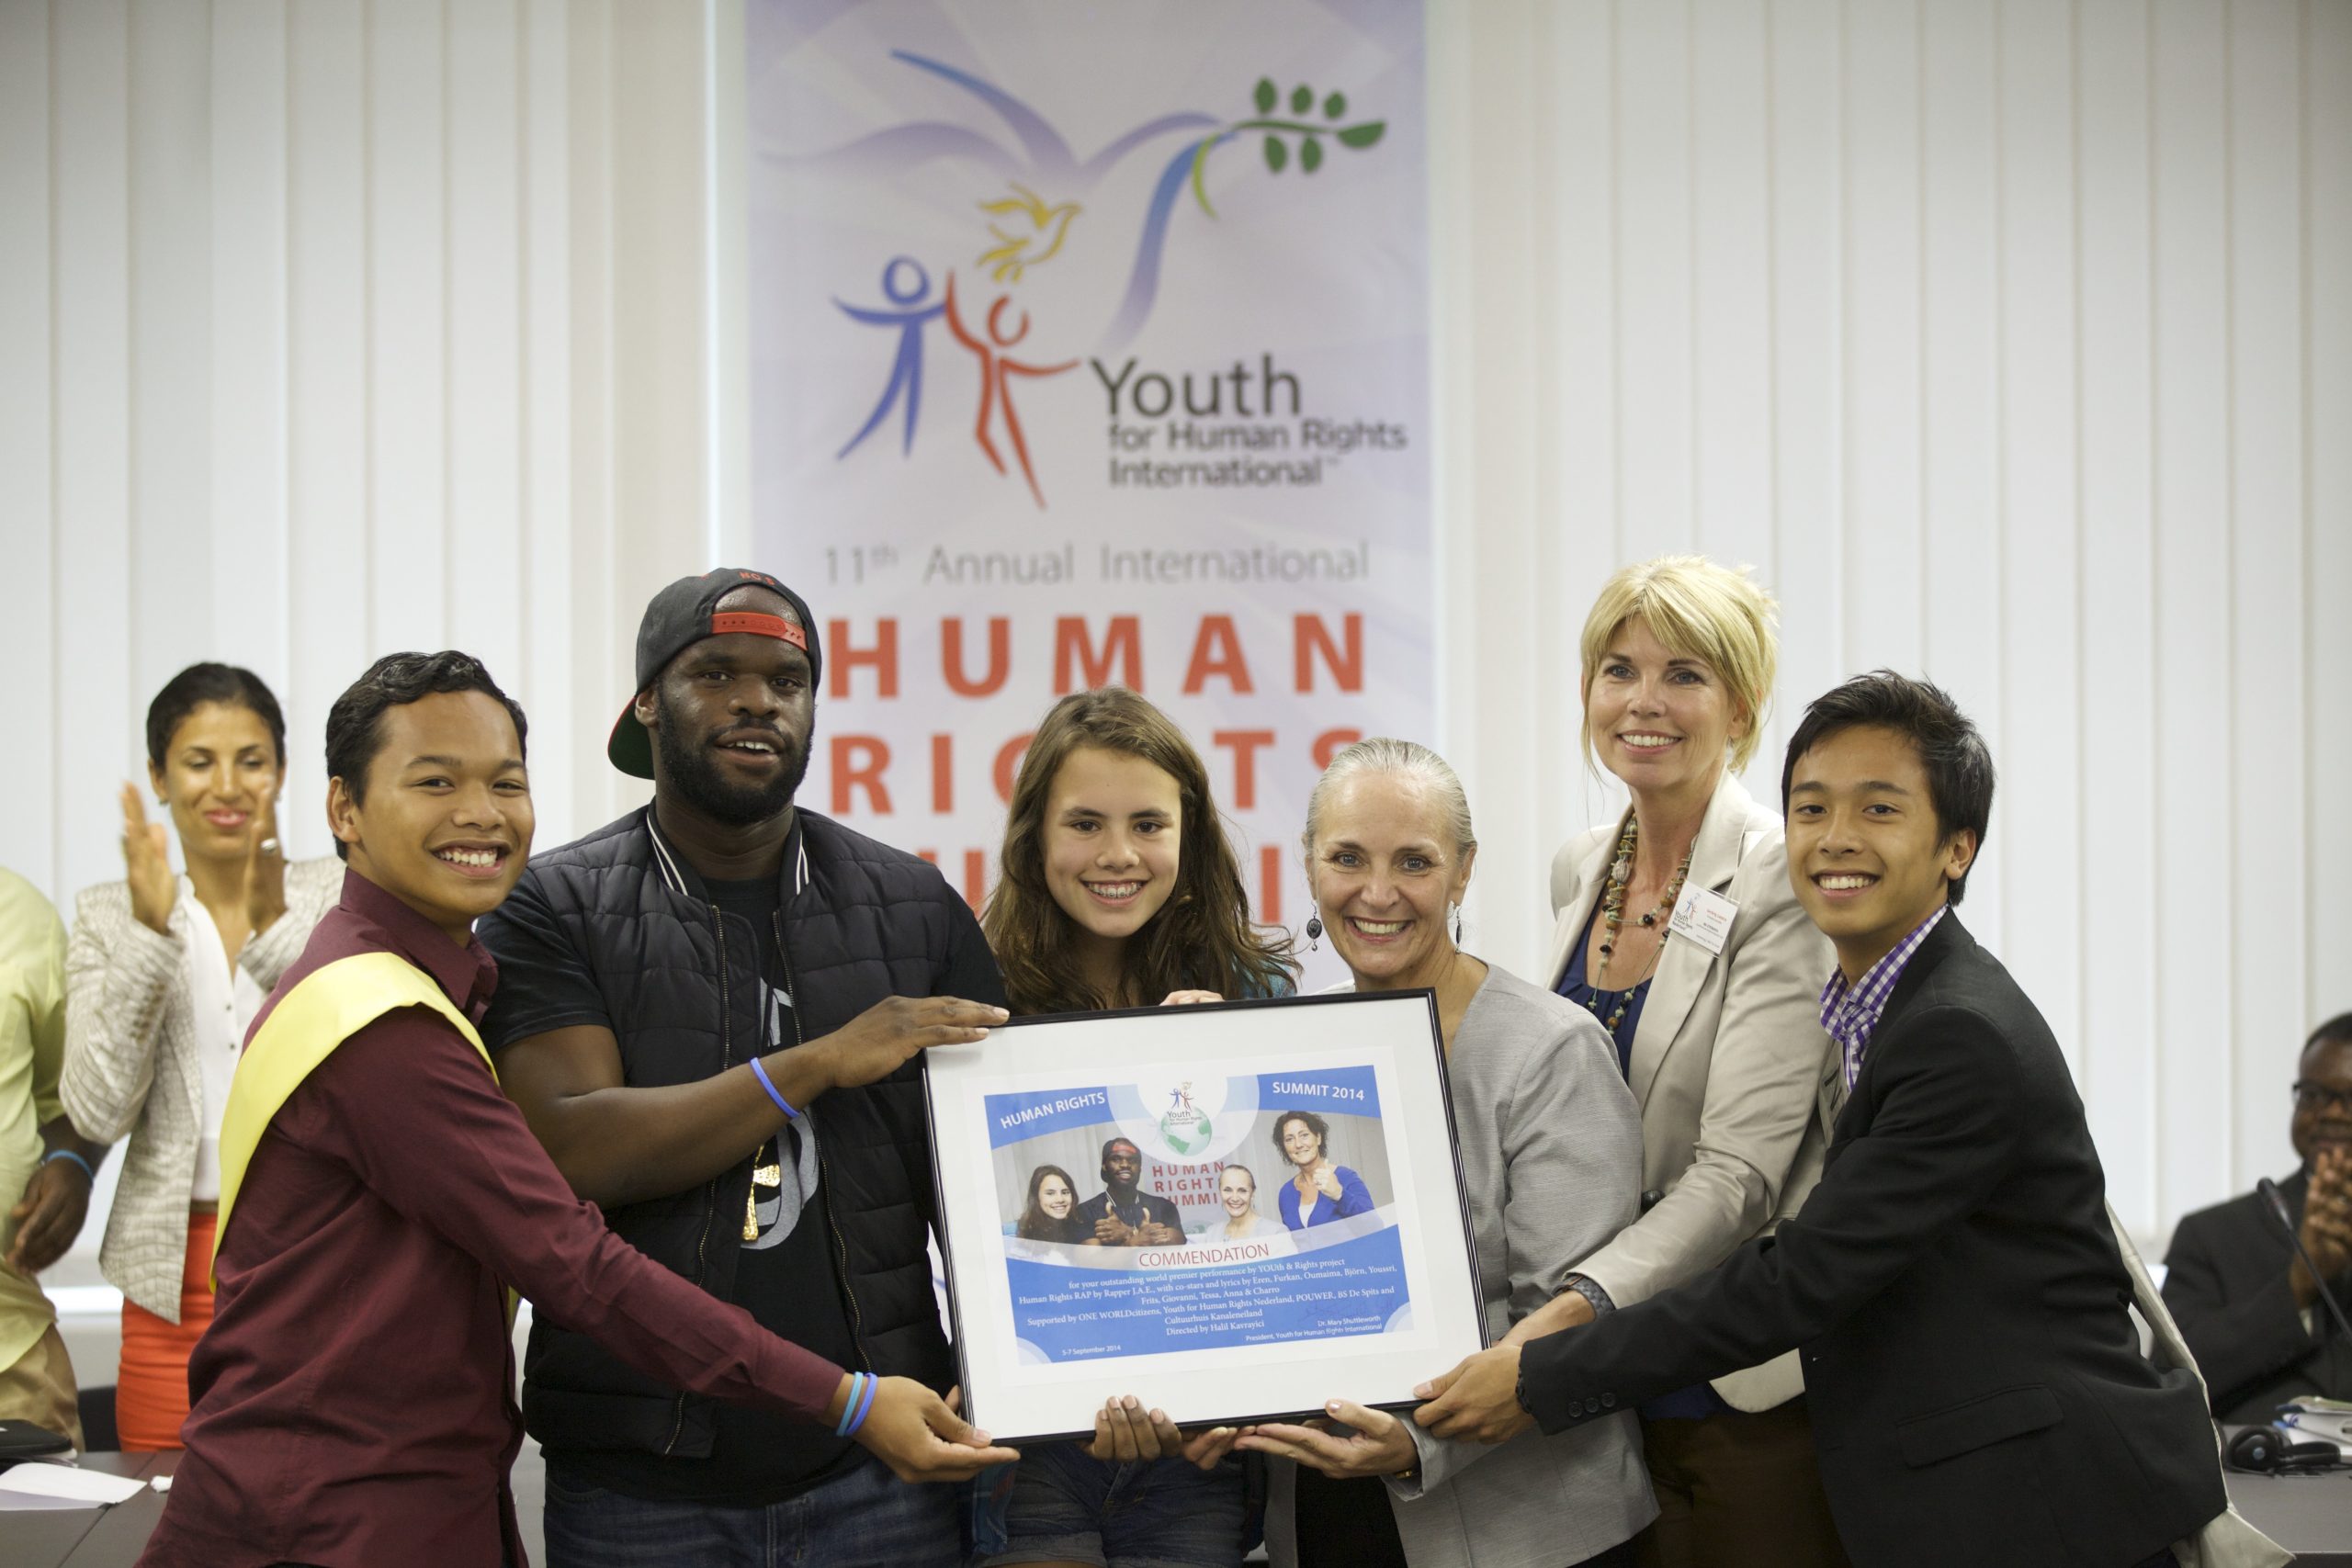 Youth for Human Rights Nederland